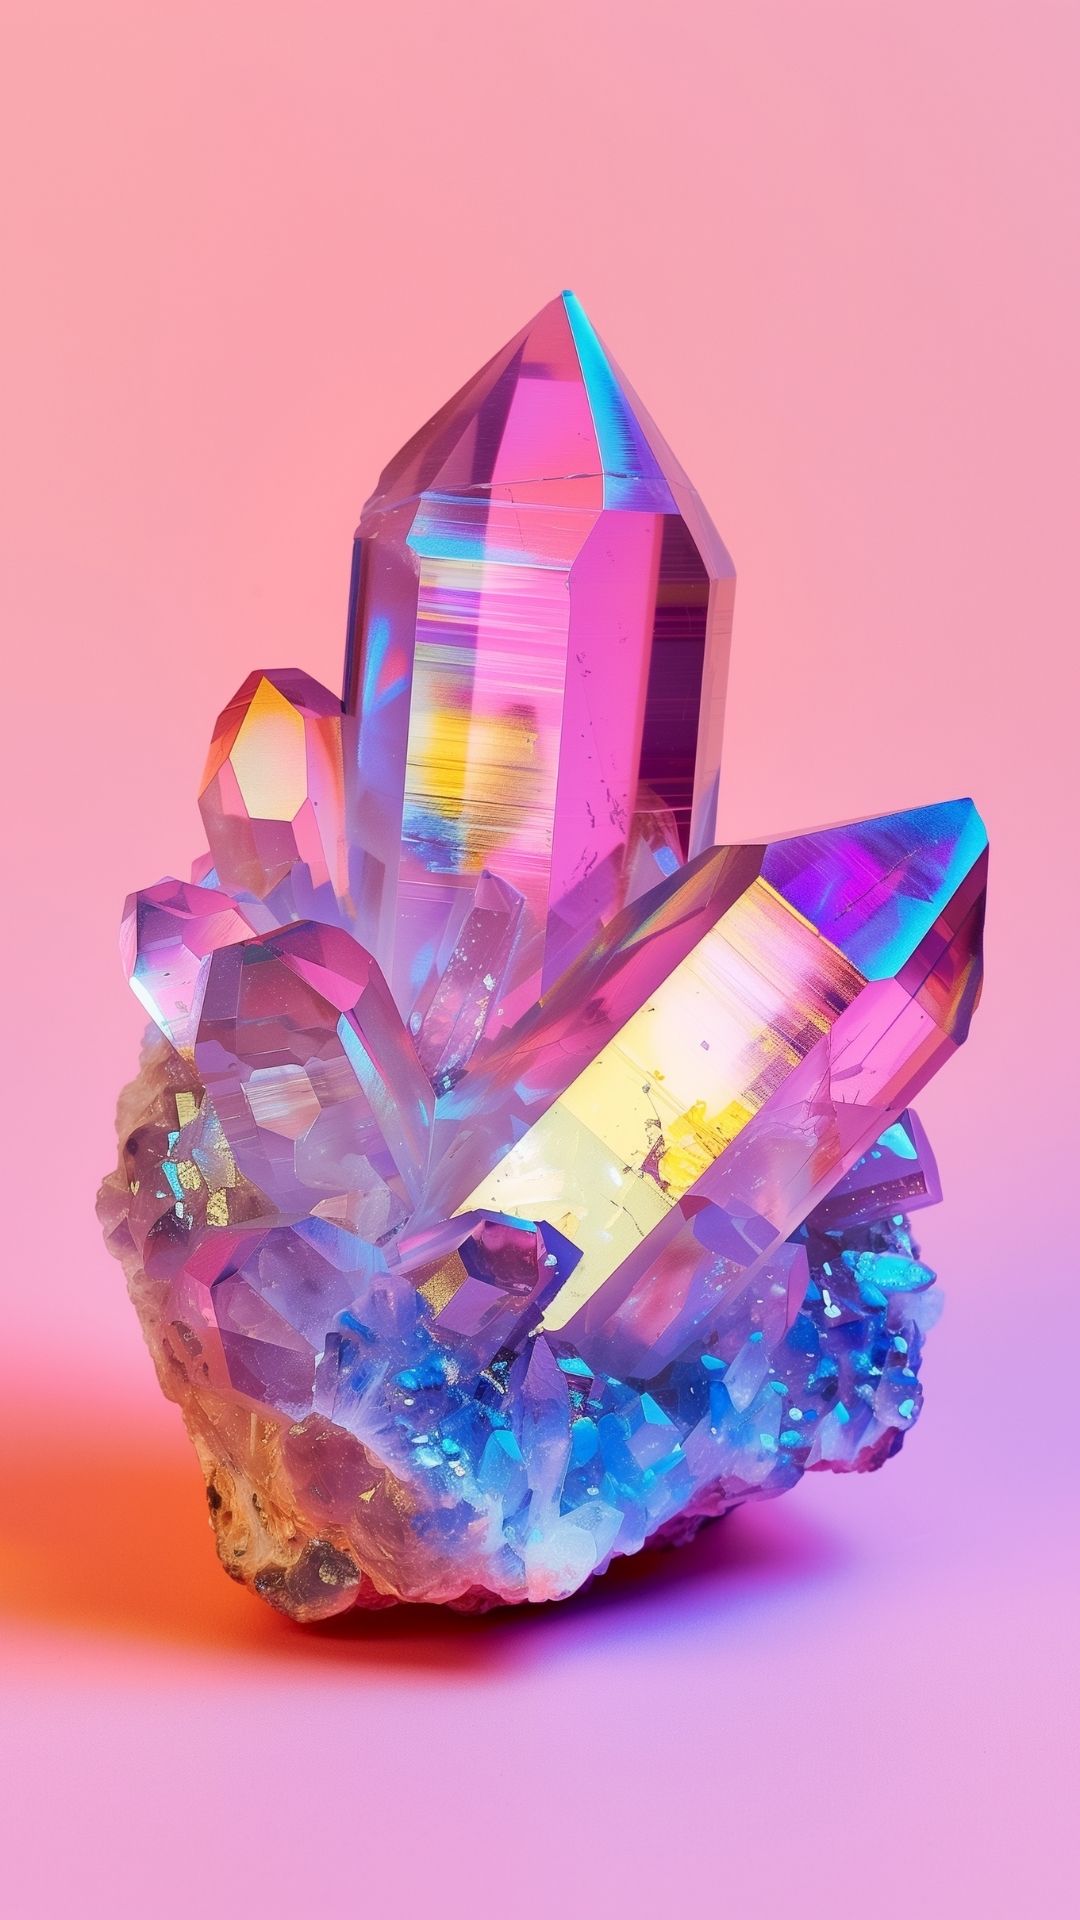 Indulge Your Iridescent Aesthetic Obsession 25 Shimmering Images Await - Sprinkle of AI Iridescent iPhone Wallpapers